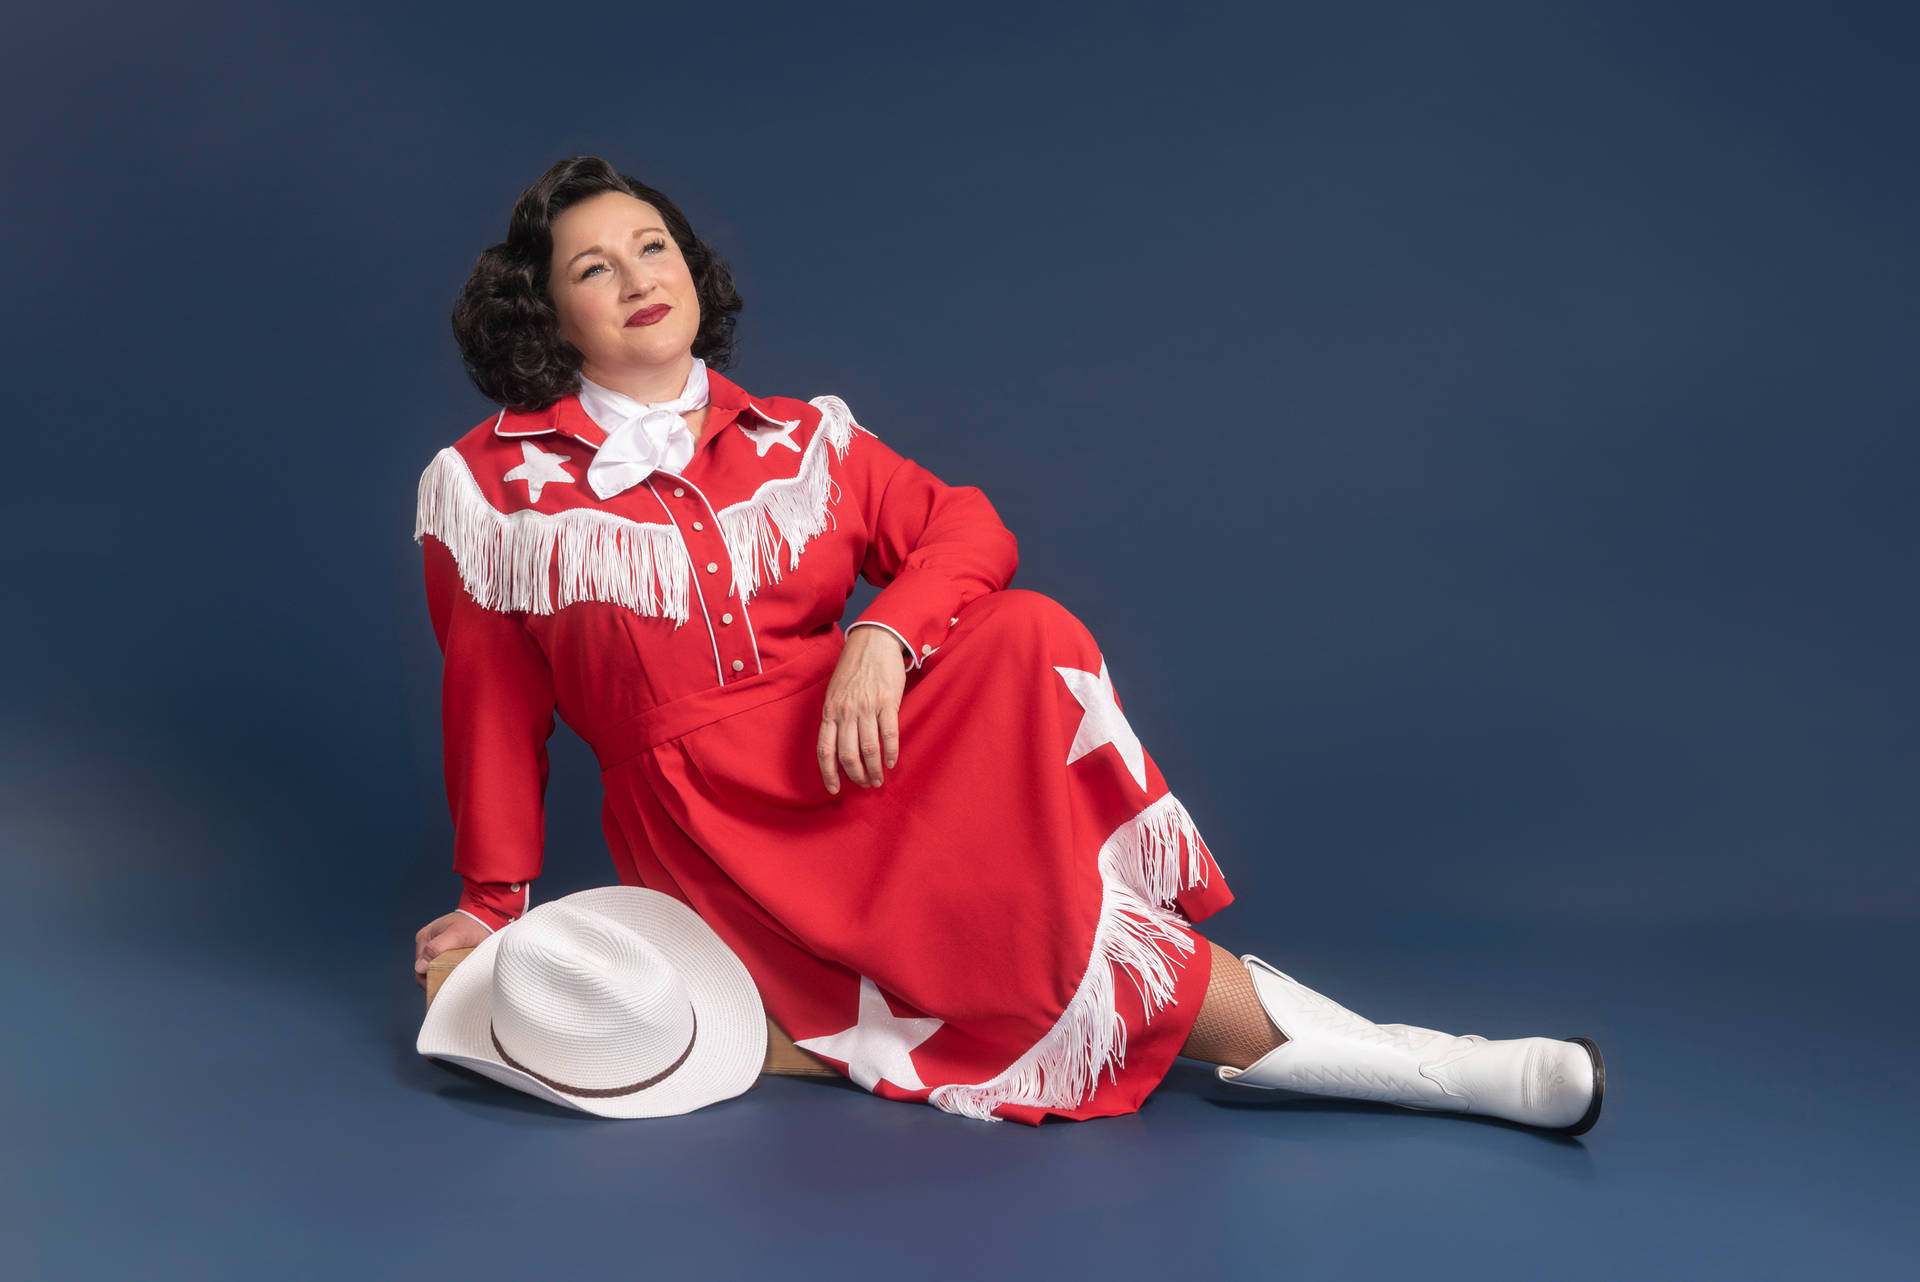 Patsy Cline in a Stunning Red and White Outfit Wallpaper